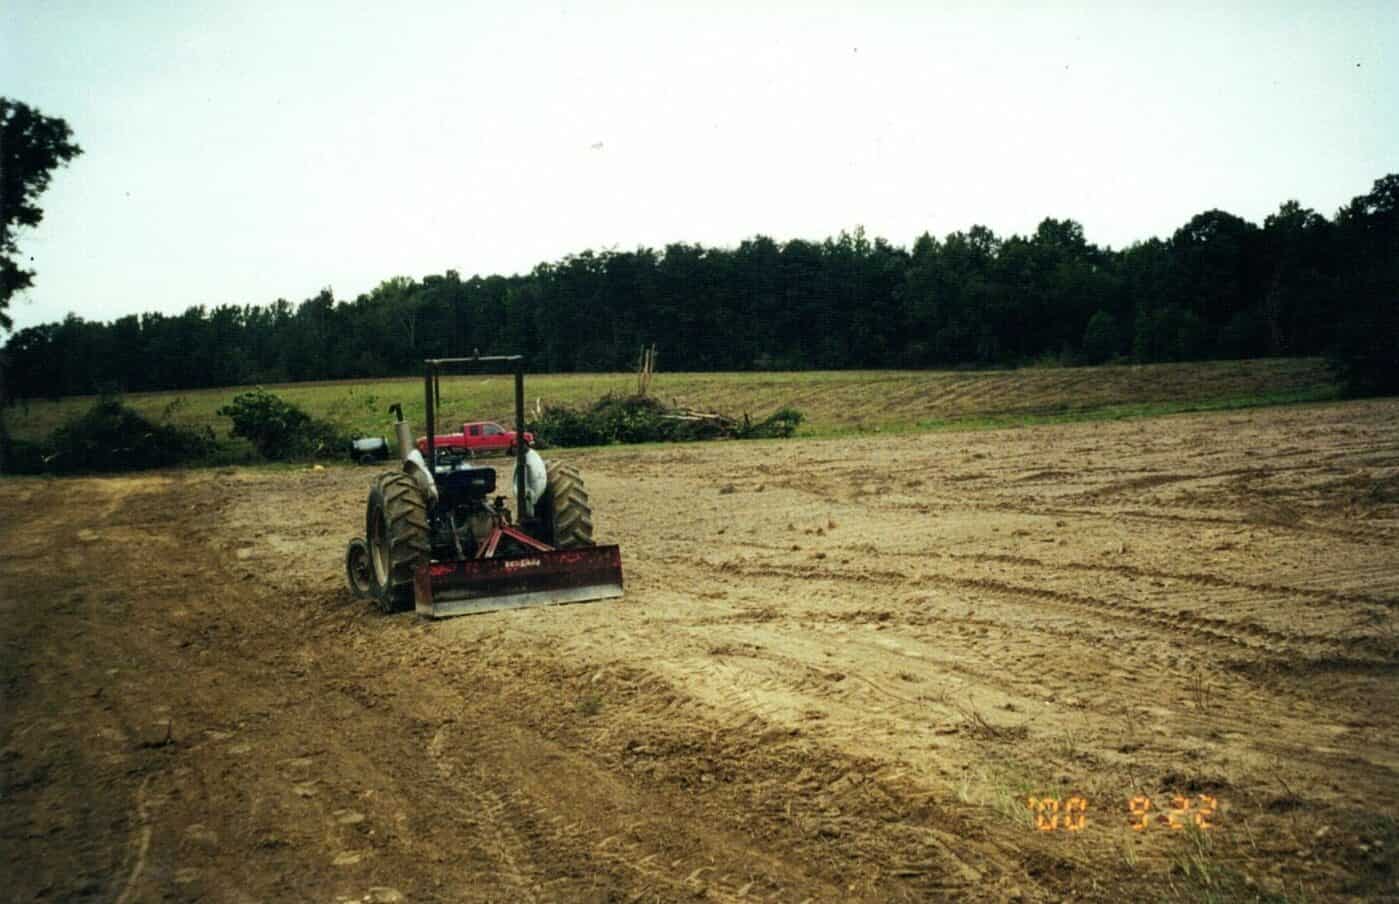 Tractor plowing field, rural farm land, daytime.